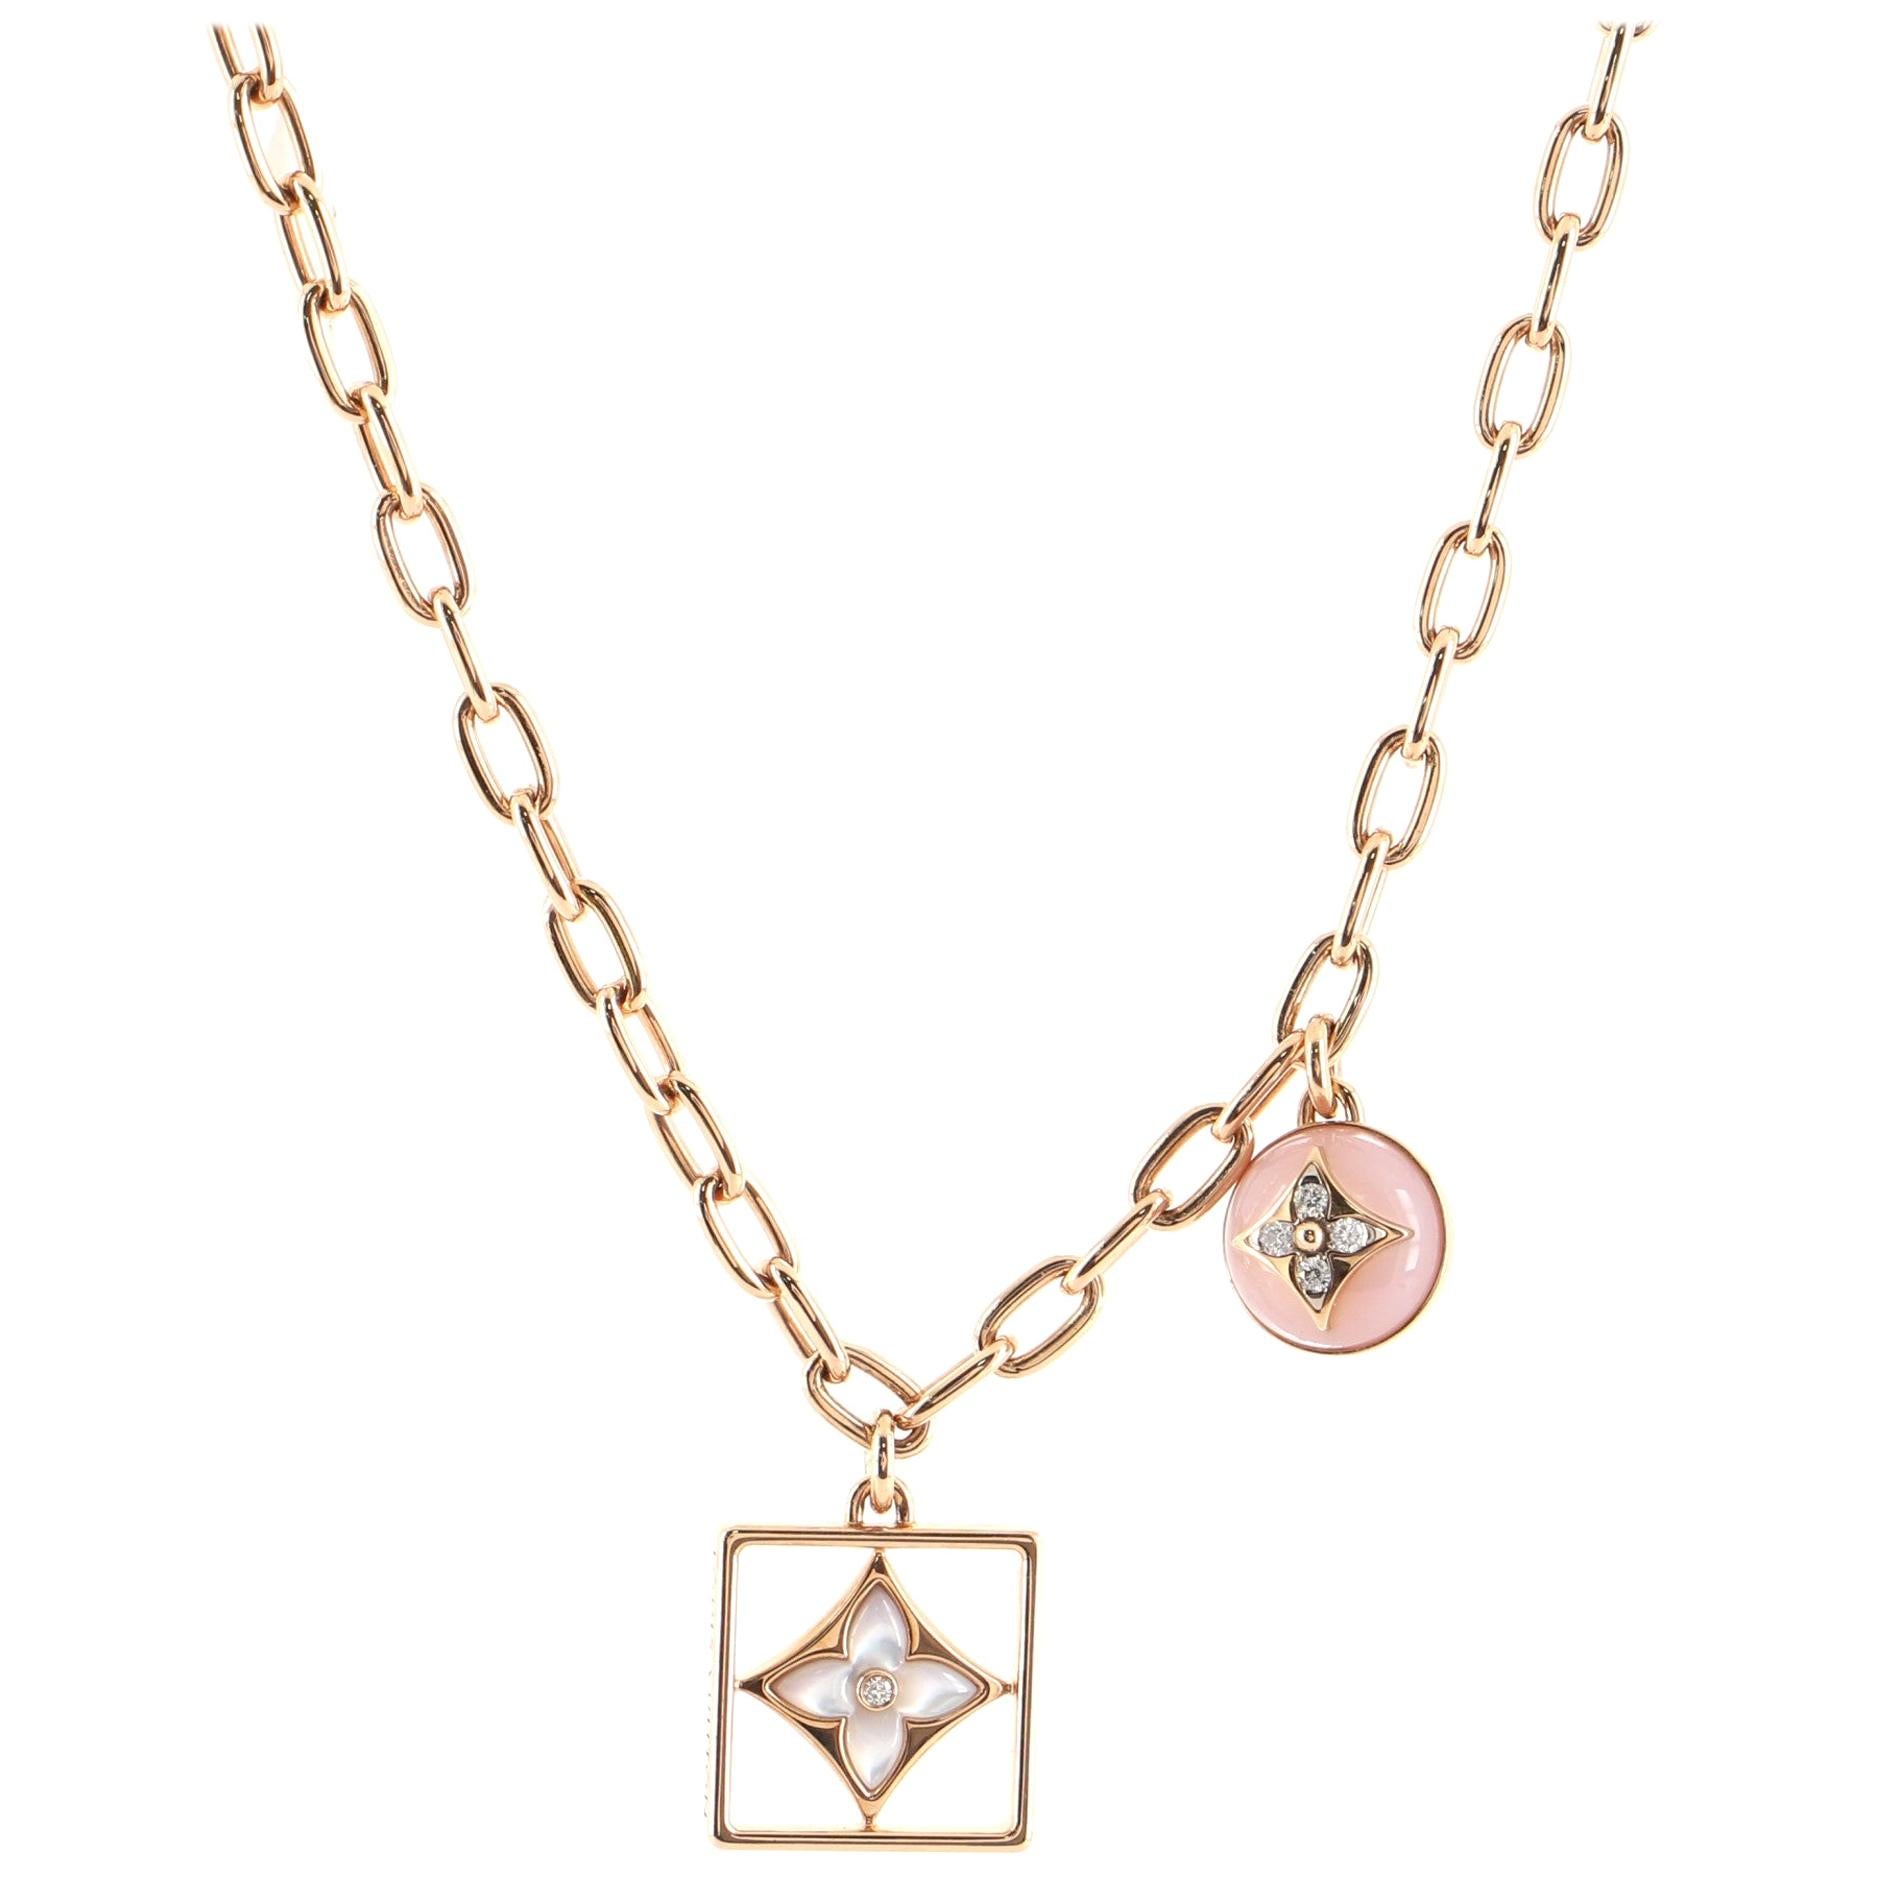 vuitton pink sapphire necklace price